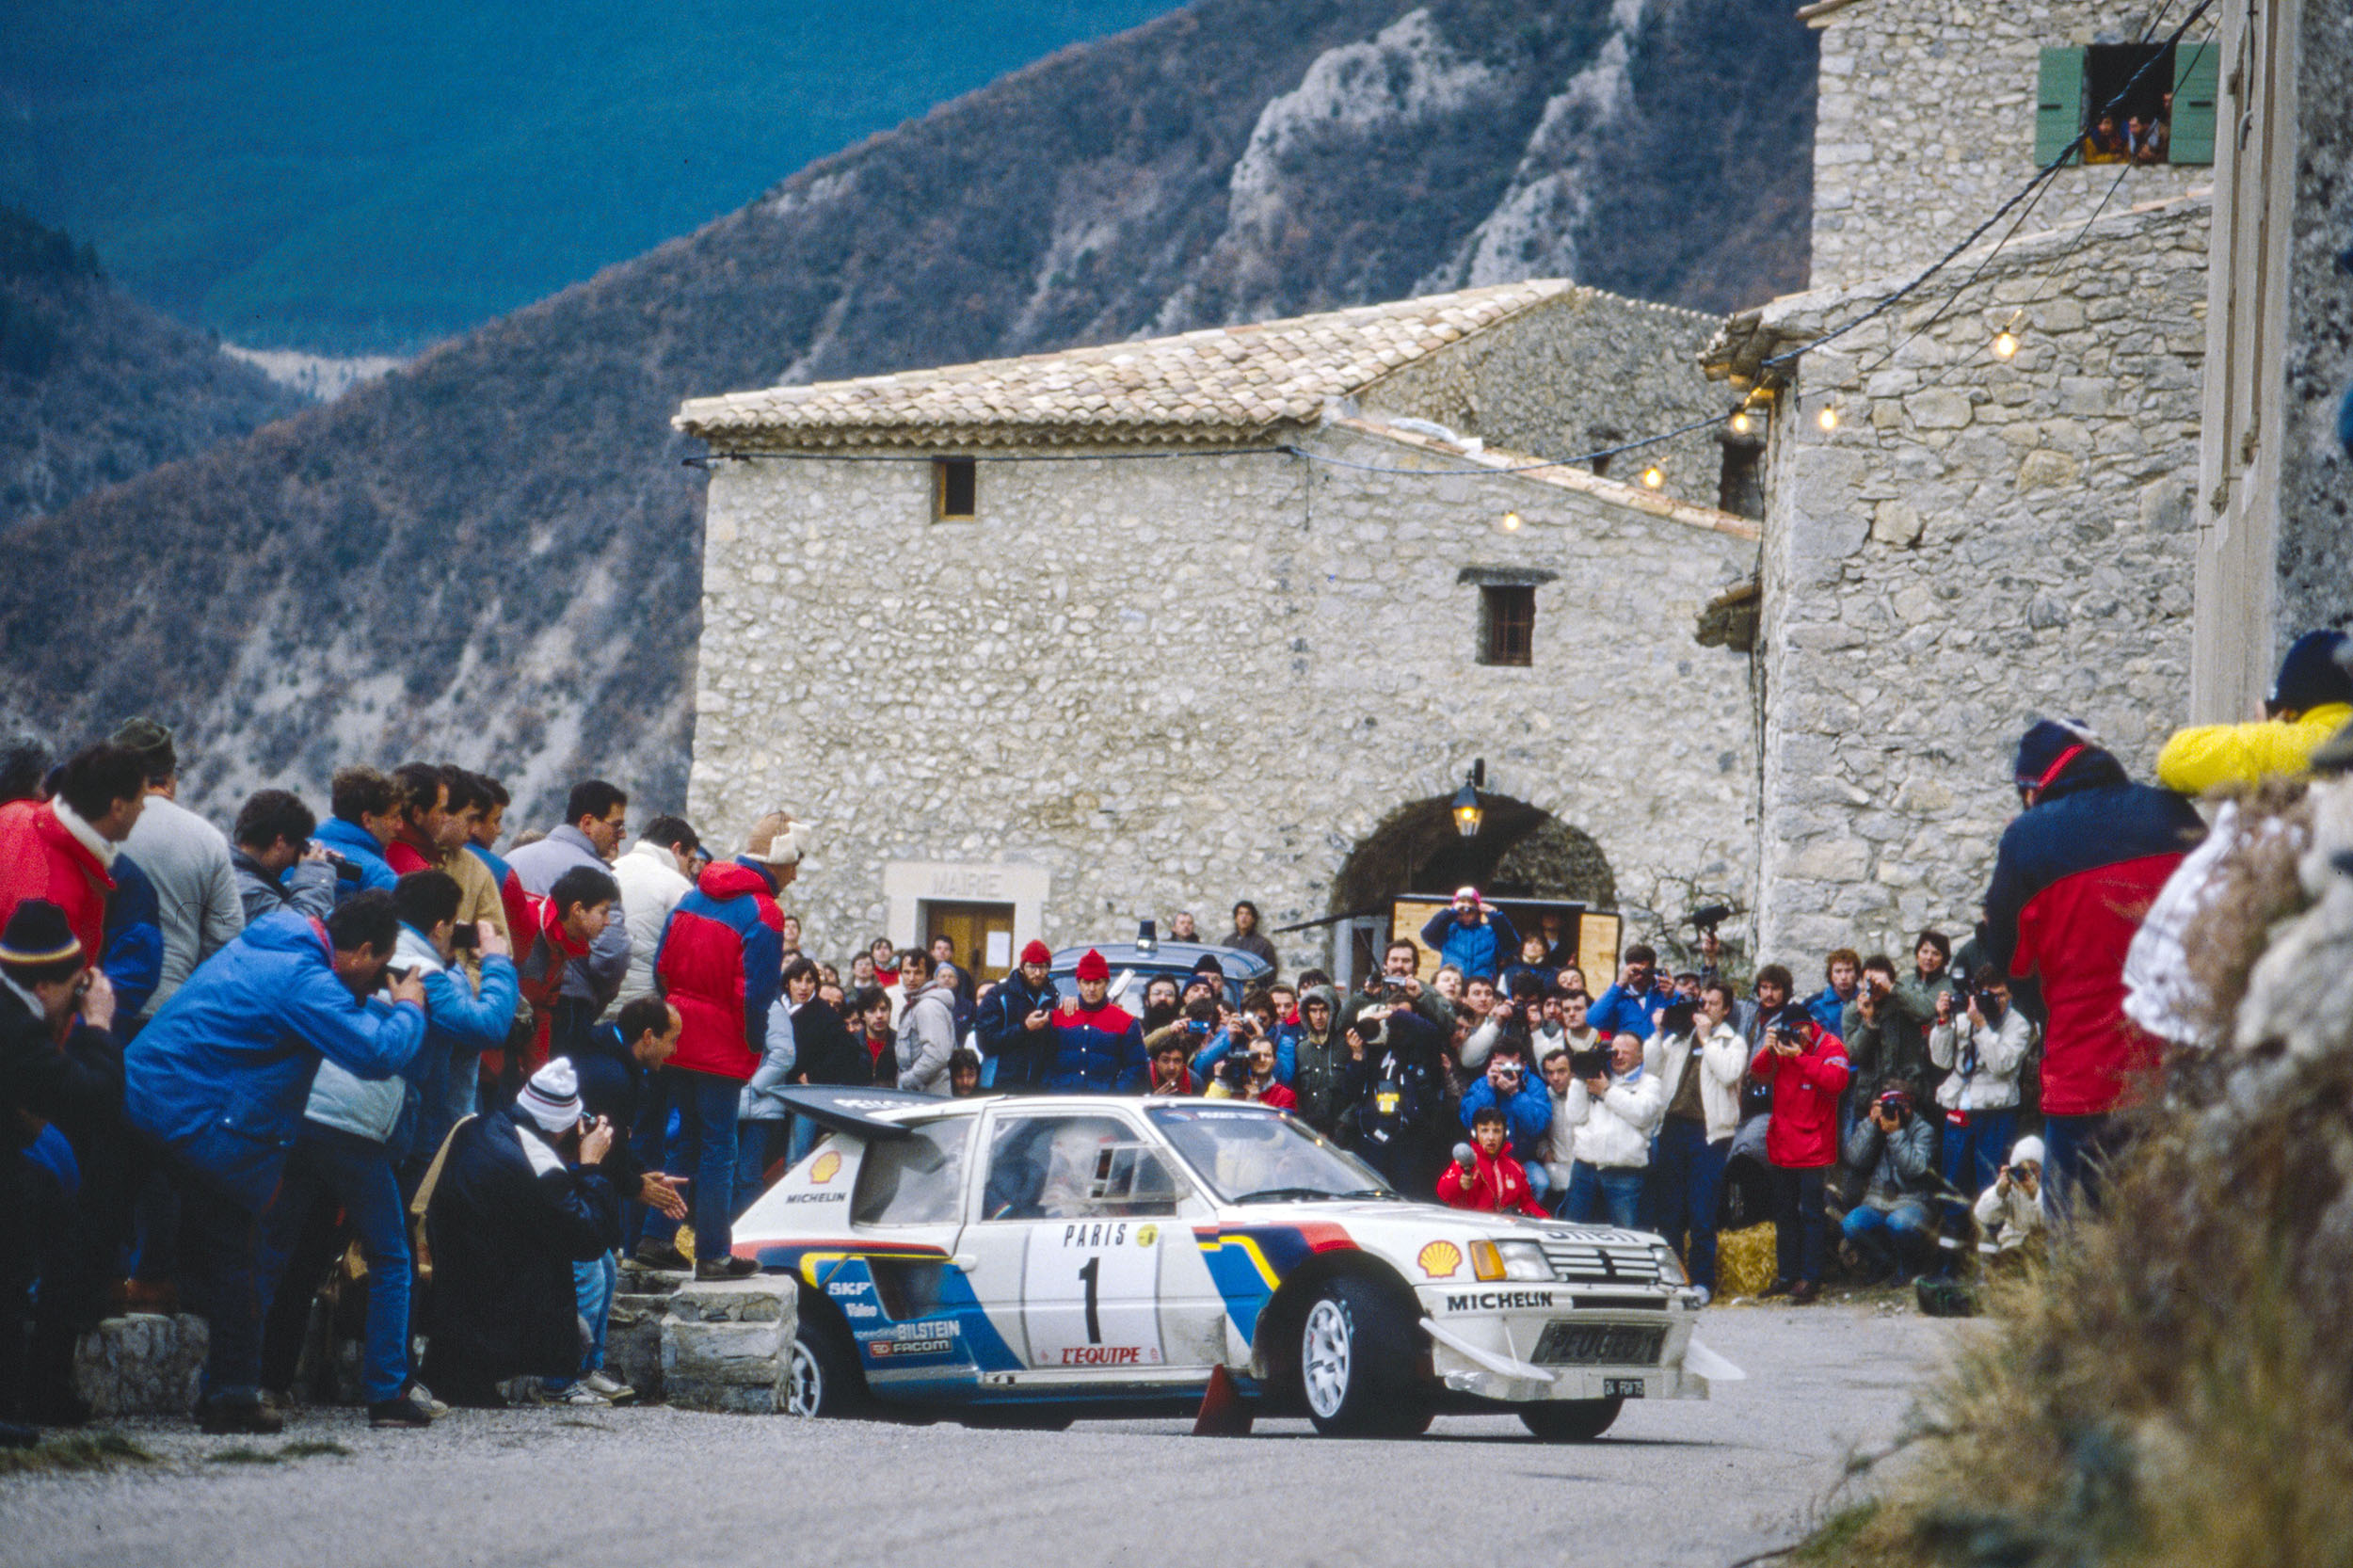 Timo Salonen - Seppo Harjanne (Fin), Peugeot 205 Turbo 16 Evo 2, action during the World Rally Championship 1986 Monte Carlo on january 24 at Monaco - Photo: DPPI